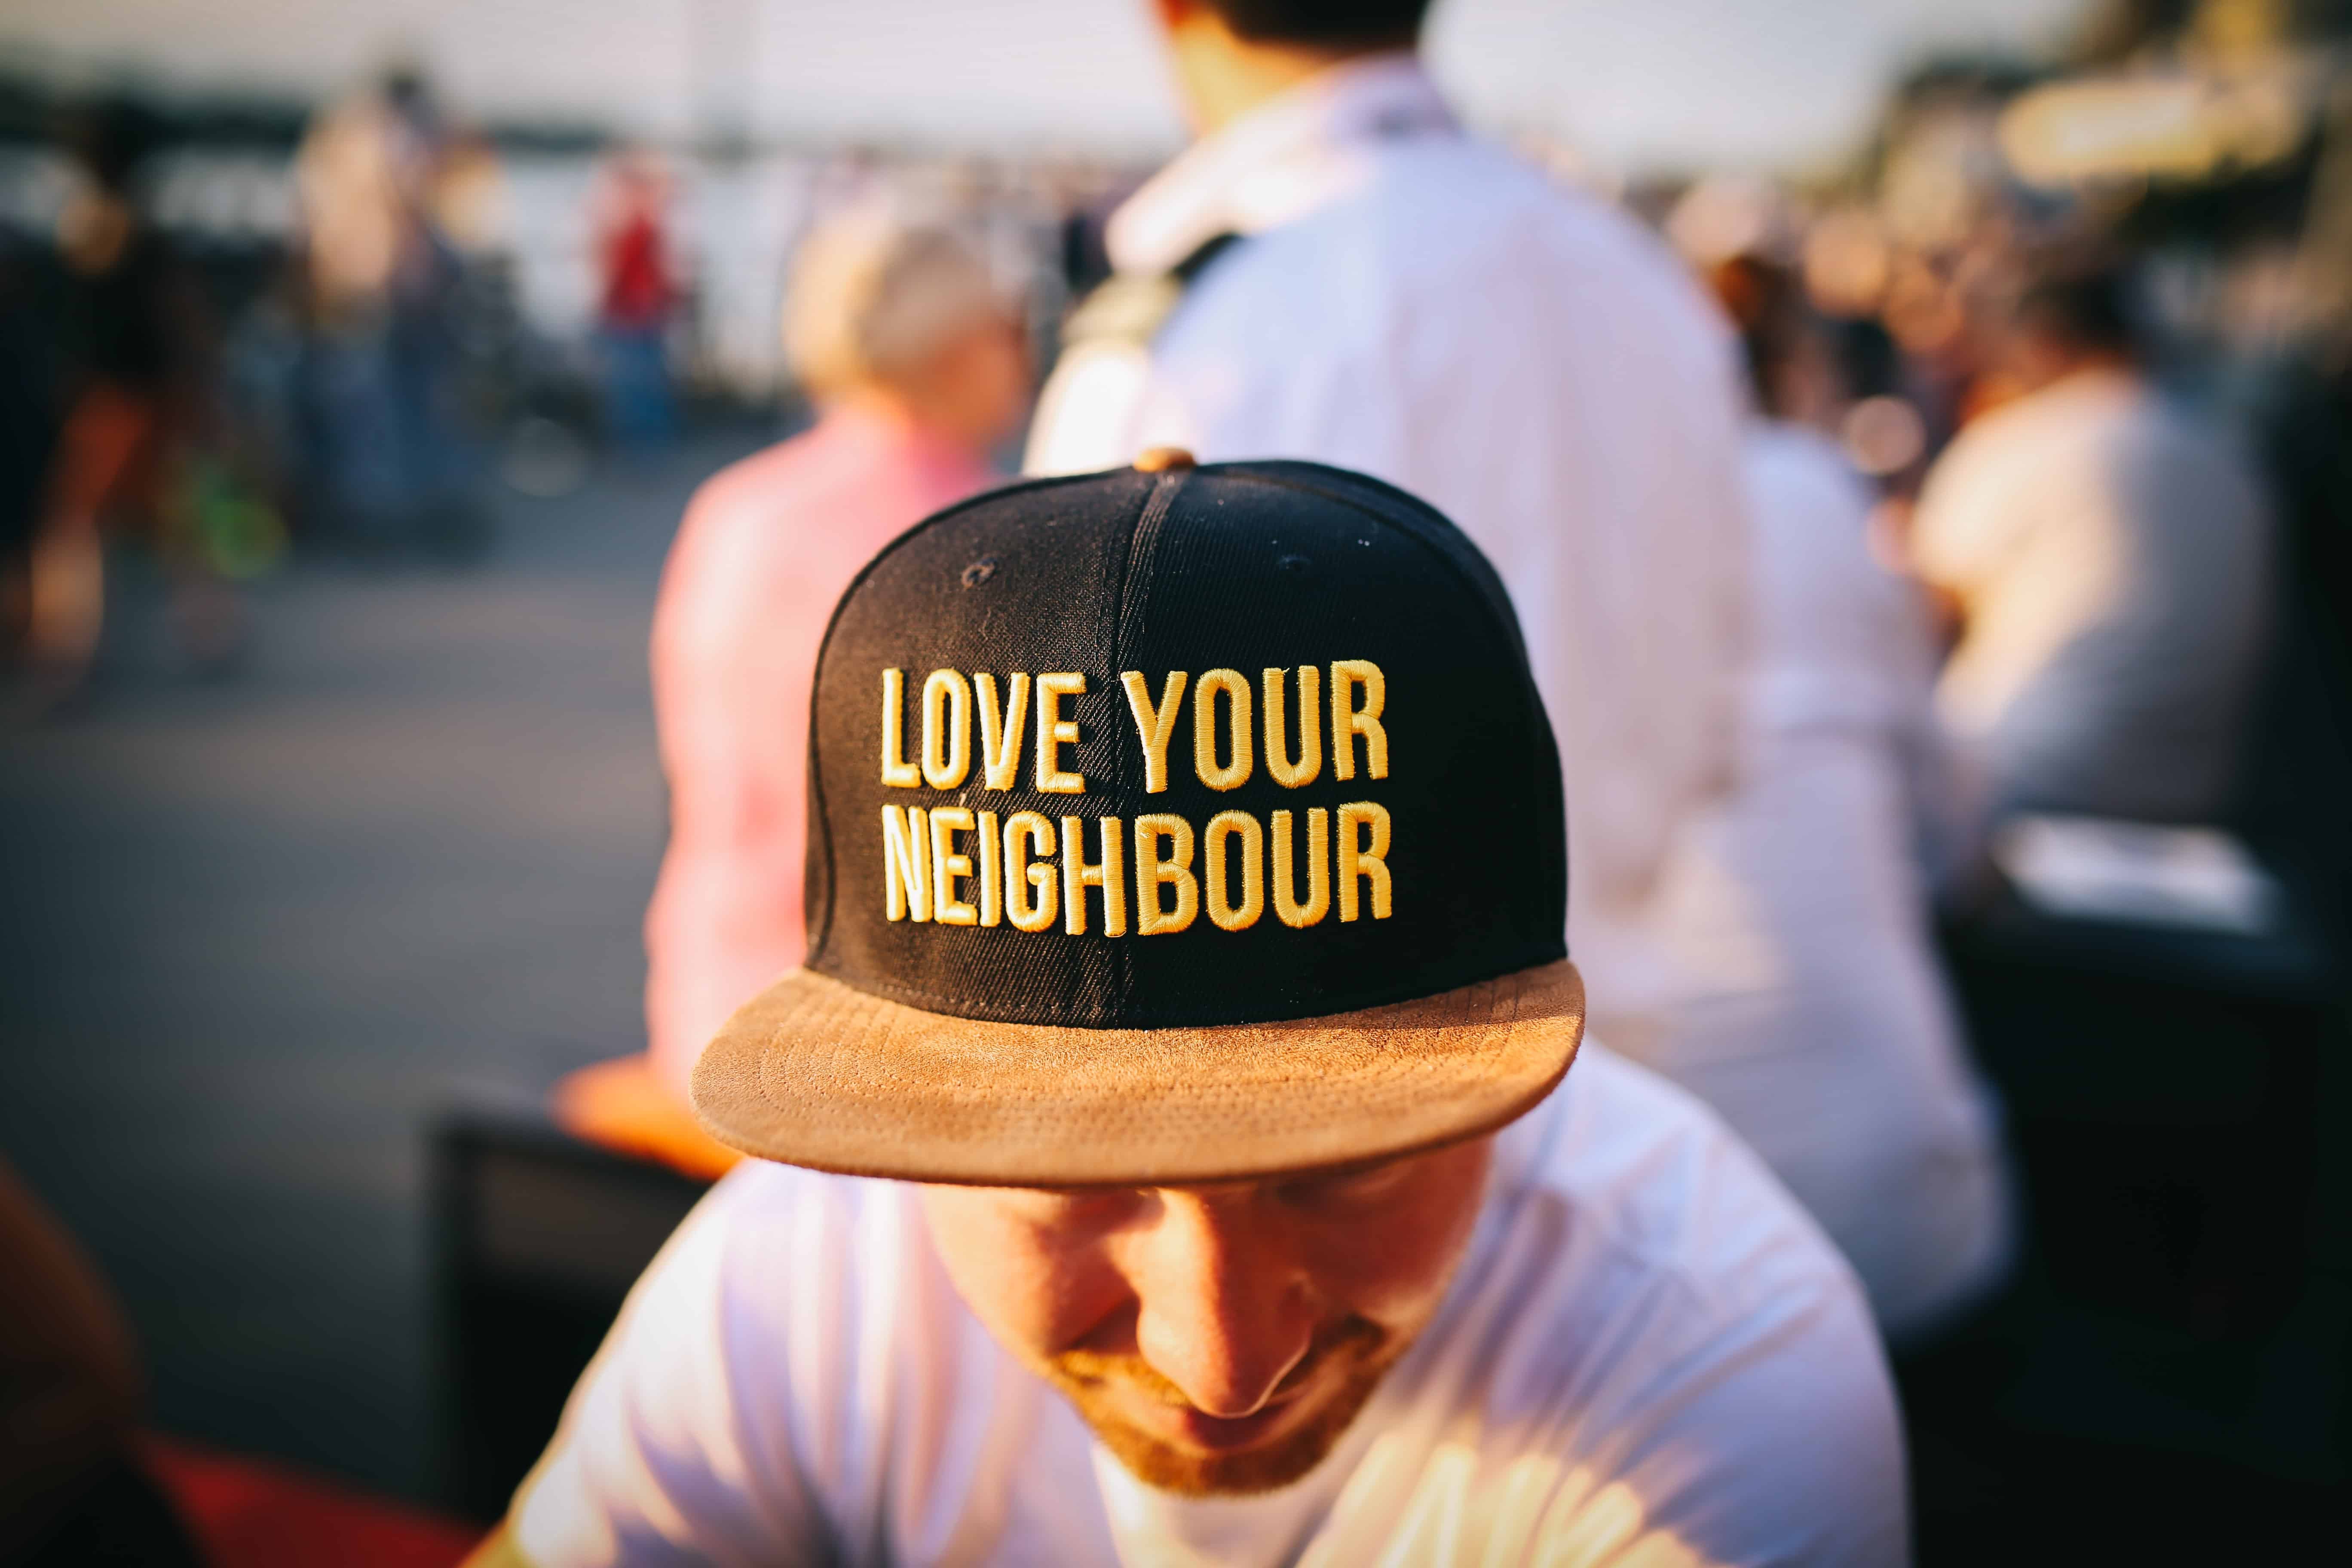 Christian wearing love your neighbor hat